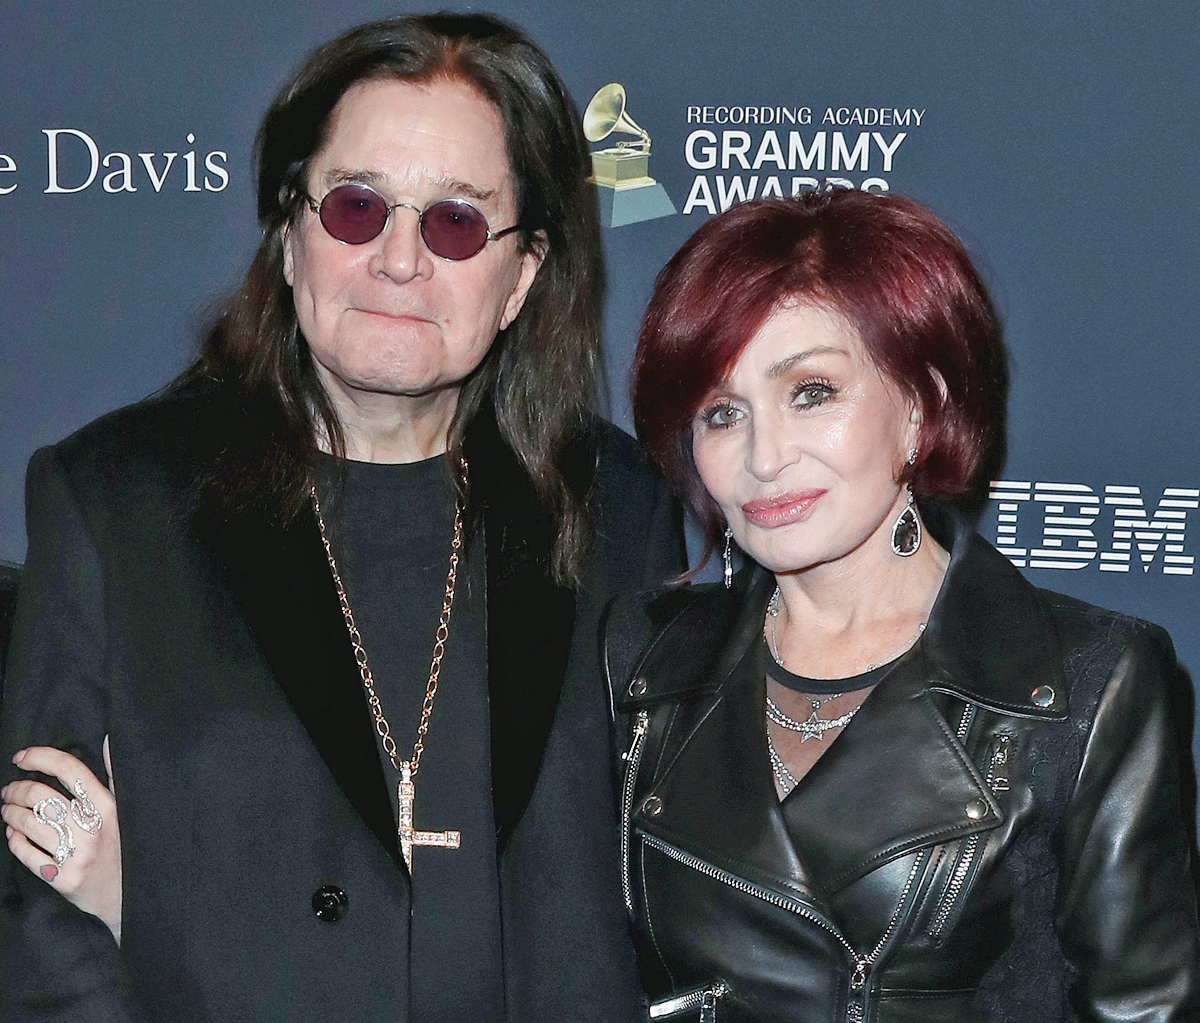 #Sharon Osbourne Says Ozzy Is Having ‘Major Operation’ That’ll ‘Determine The Rest Of His Life’